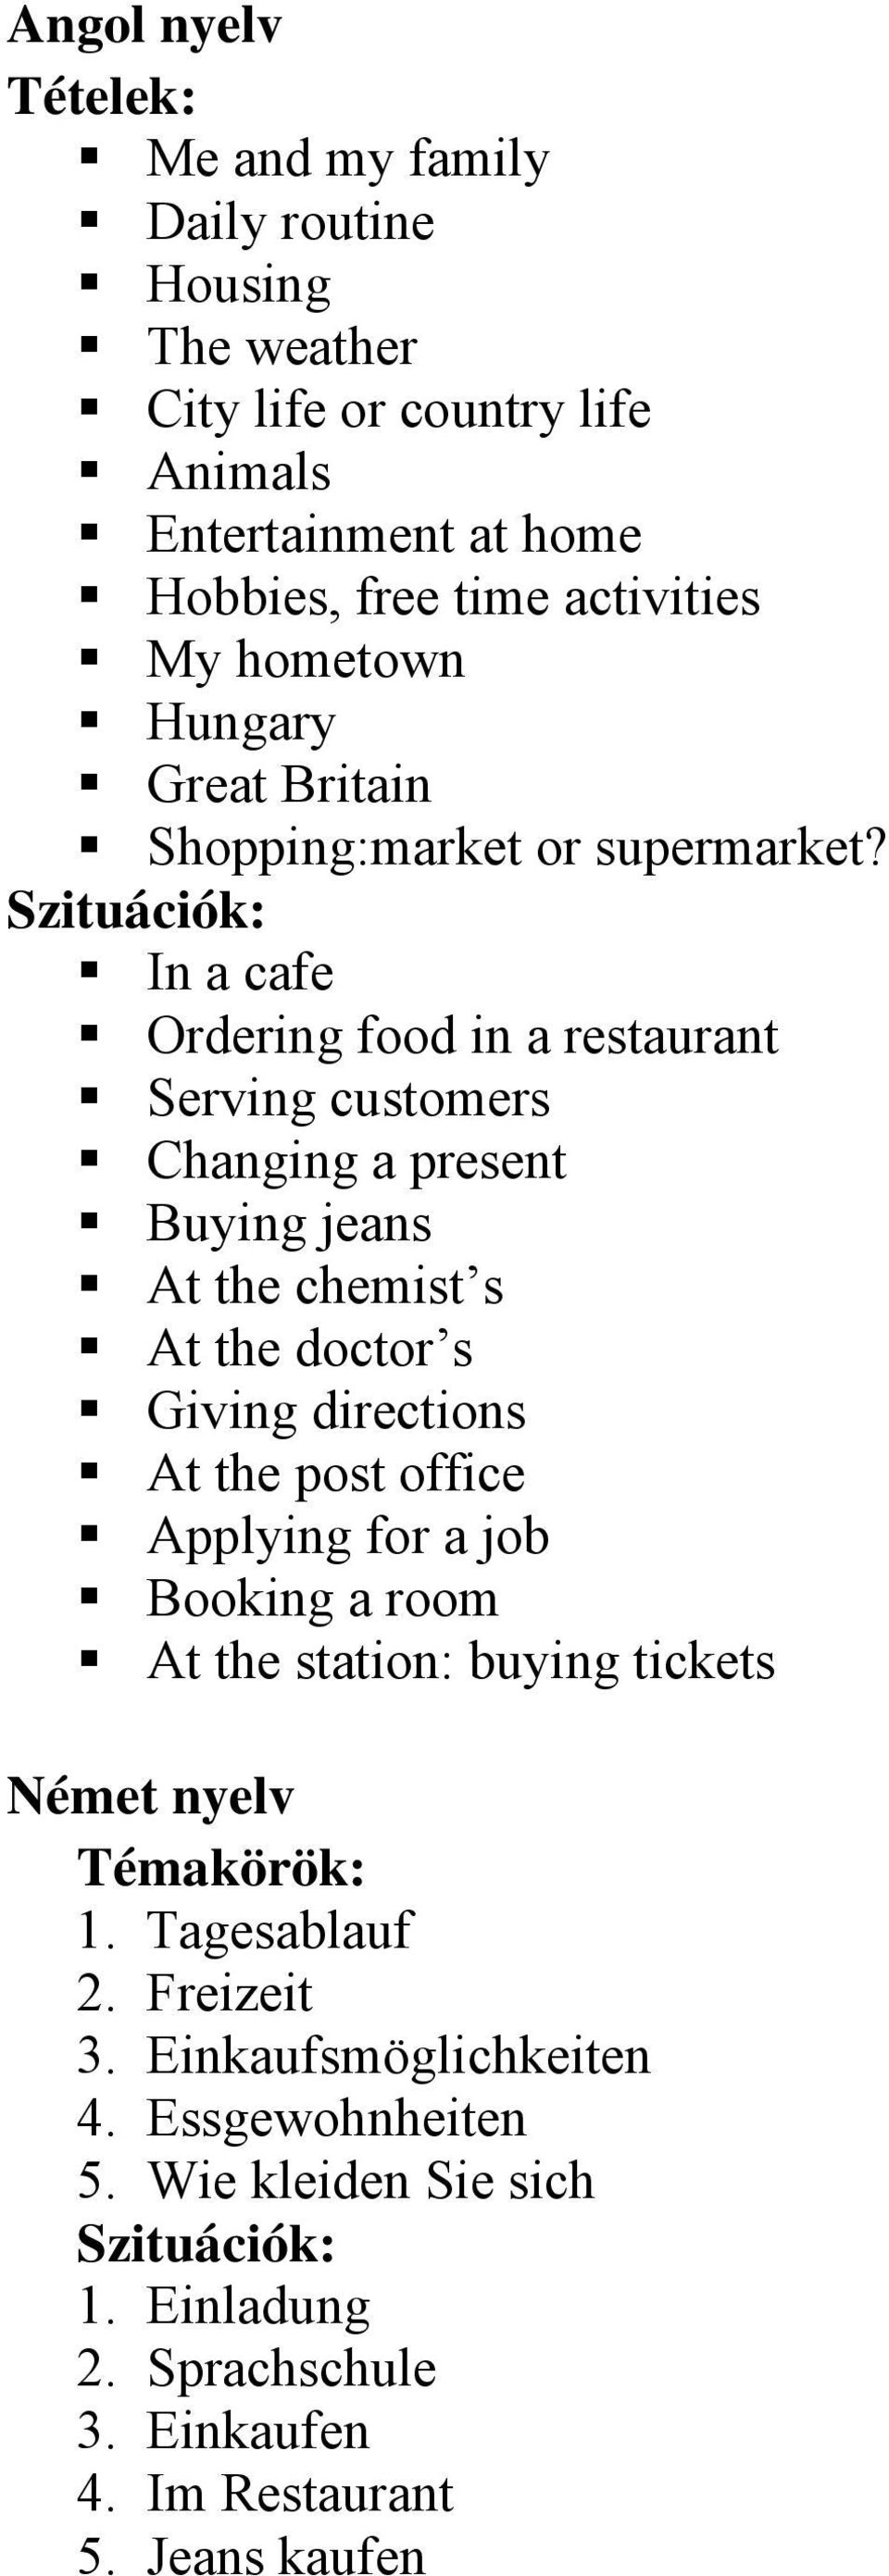 Szituációk: In a cafe Ordering food in a restaurant Serving customers Changing a present Buying jeans At the chemist s At the doctor s Giving directions At the post